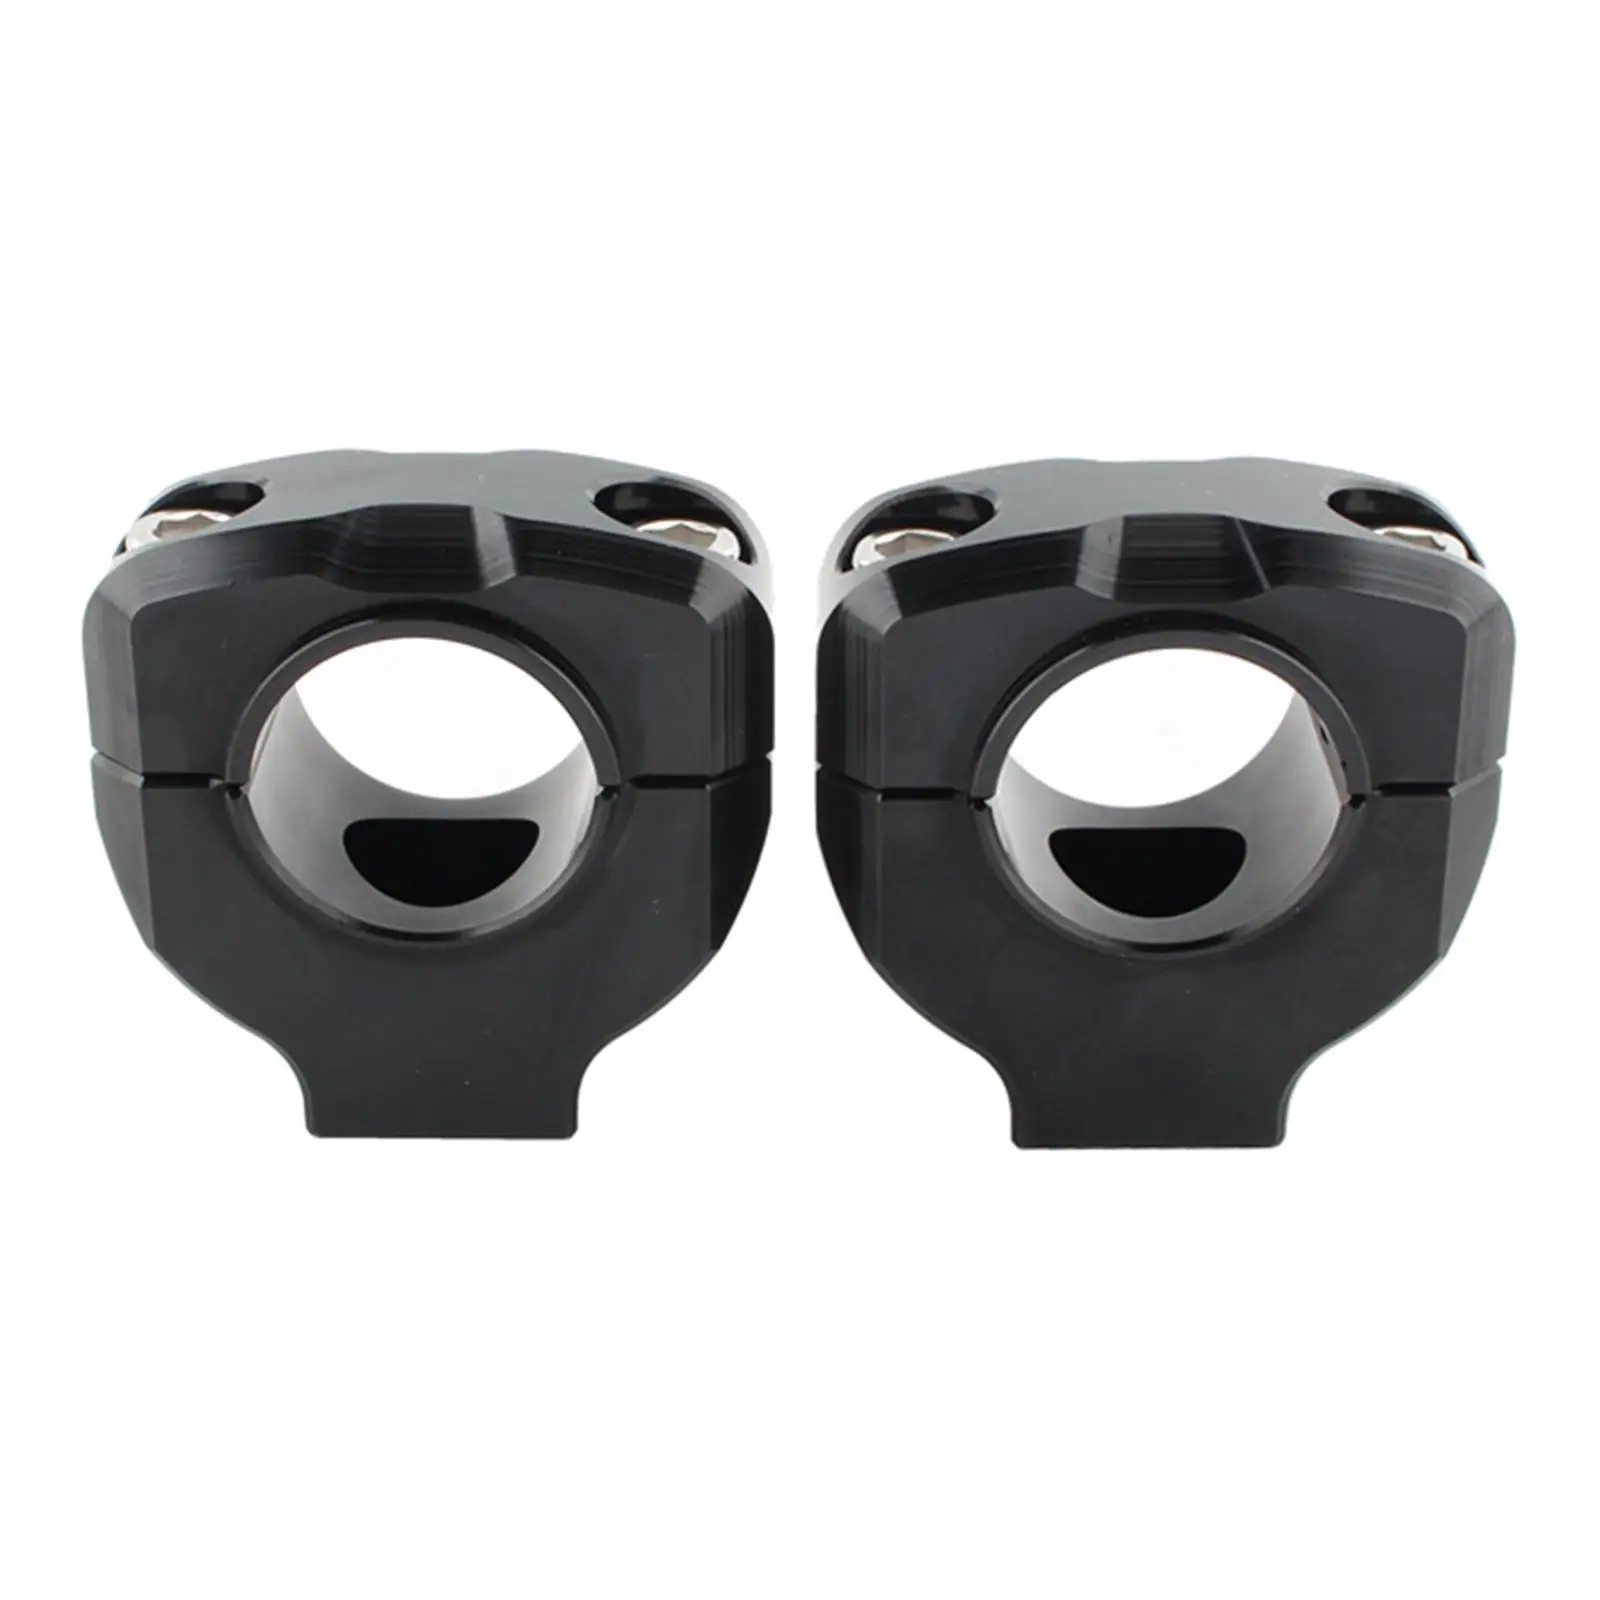 1 pair of universal motorcycle 28mm 1/8 inch handlebar riser clamp   Lifter - £16.70 GBP